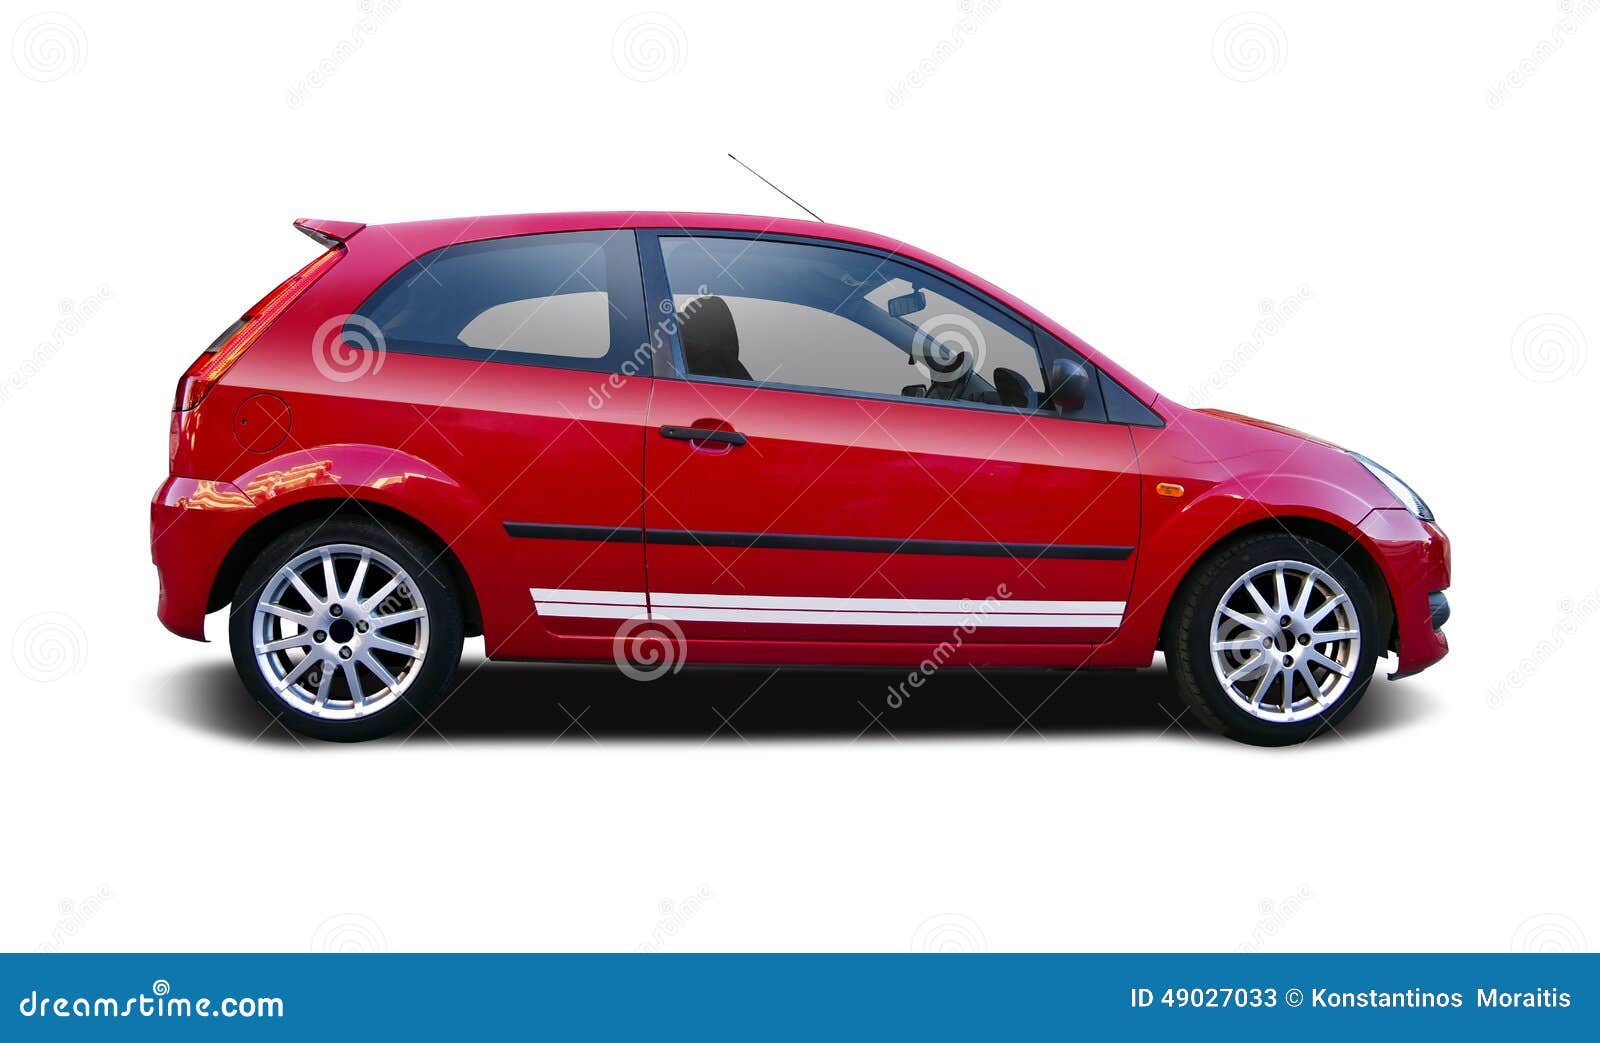 Ford Fiesta Fifth Generation Stock Image - Image of transport, 49027033